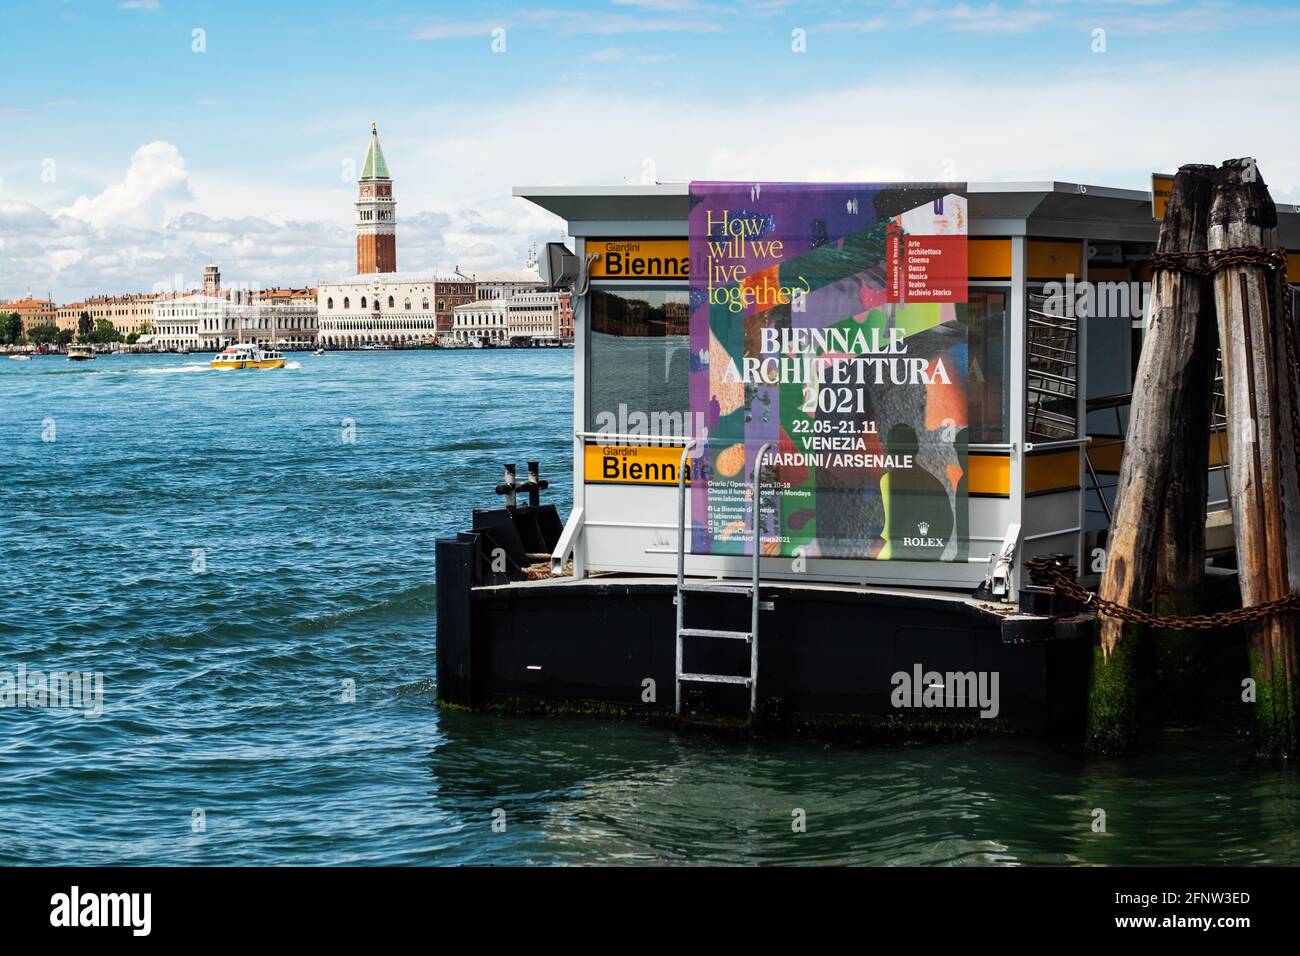 Venice, Italy. 19th May, 2021. A sign of the Biennale Architettura 2021 is seen during the press preview of the 2021 Biennale Architecture, 'How will we live together?', on 15th May in Venice, Italy. The Venice Biennale Architecture will open on 22nd of May until 21st of November,after the pandemic for Coivd-19 . © Simone Padovani / Awakening / Alamy Live News Stock Photo